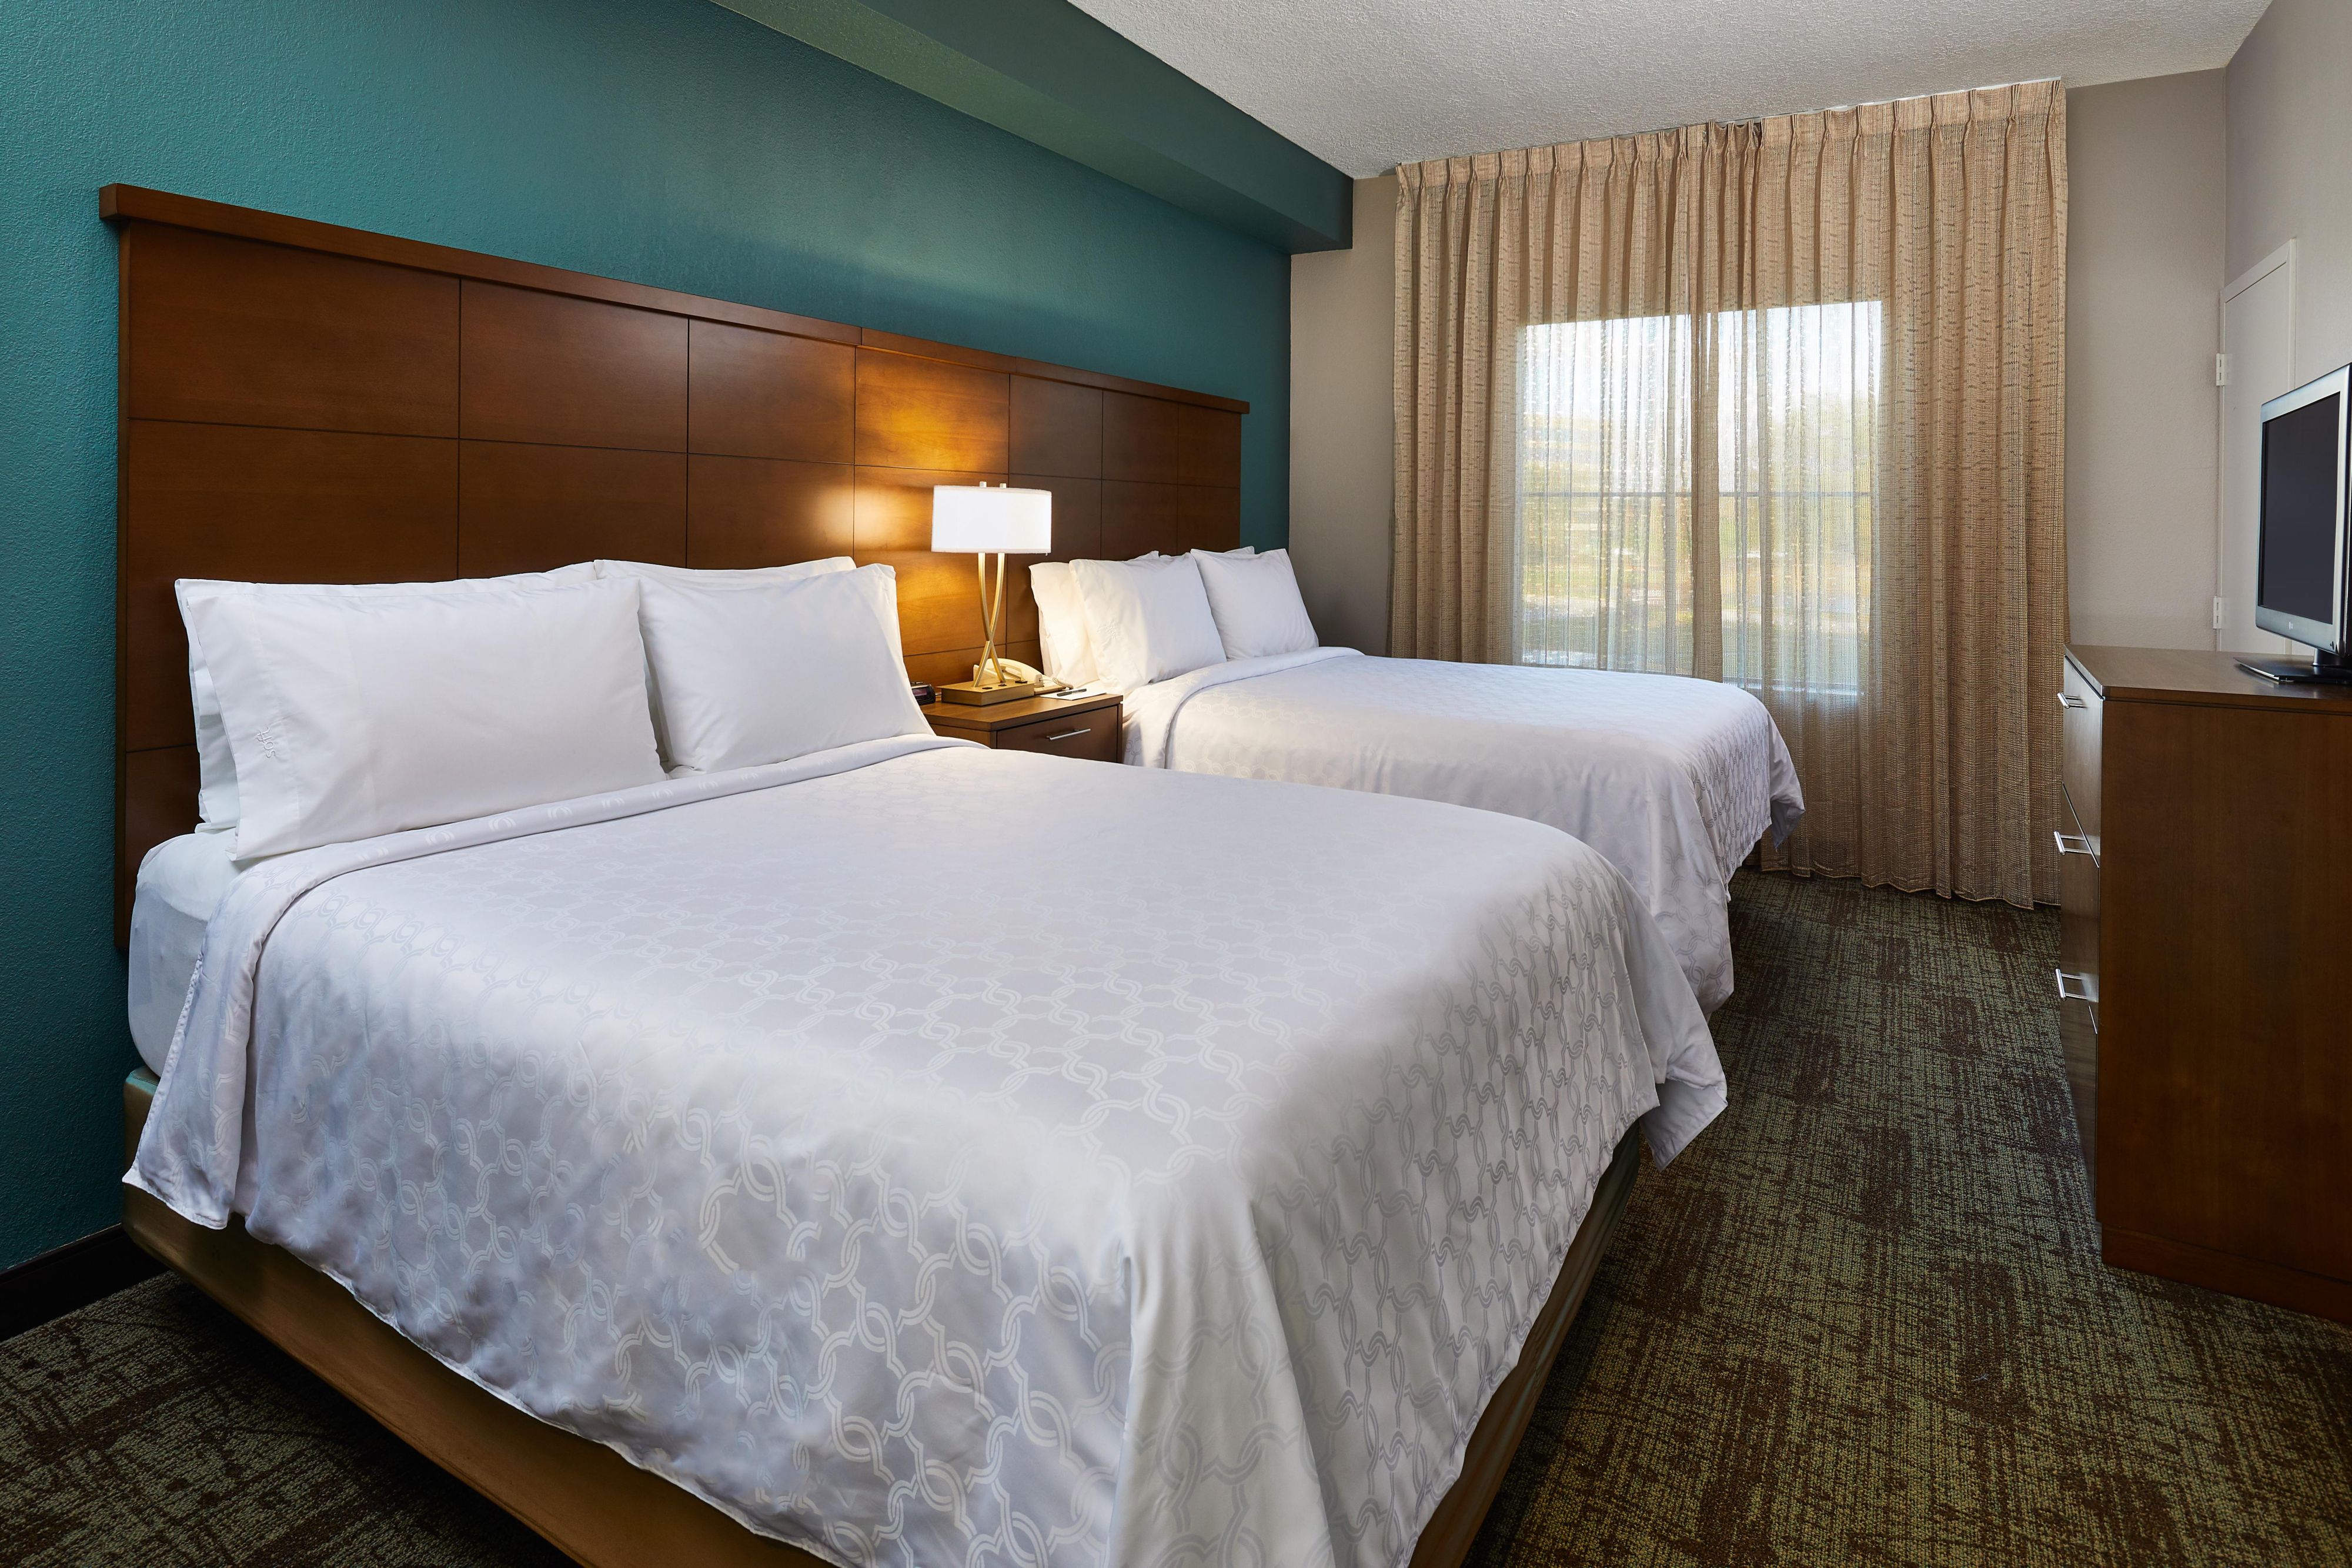 The Staybridge Suites Orlando Airport is ready to host coaches, sport teams, and travelers. Two spacious suite options include one-bedroom and two-bedroom/two-bath suites. Fully equipped kitchen with refrigerator and ice maker, microwave, stove top and dishwasher. 